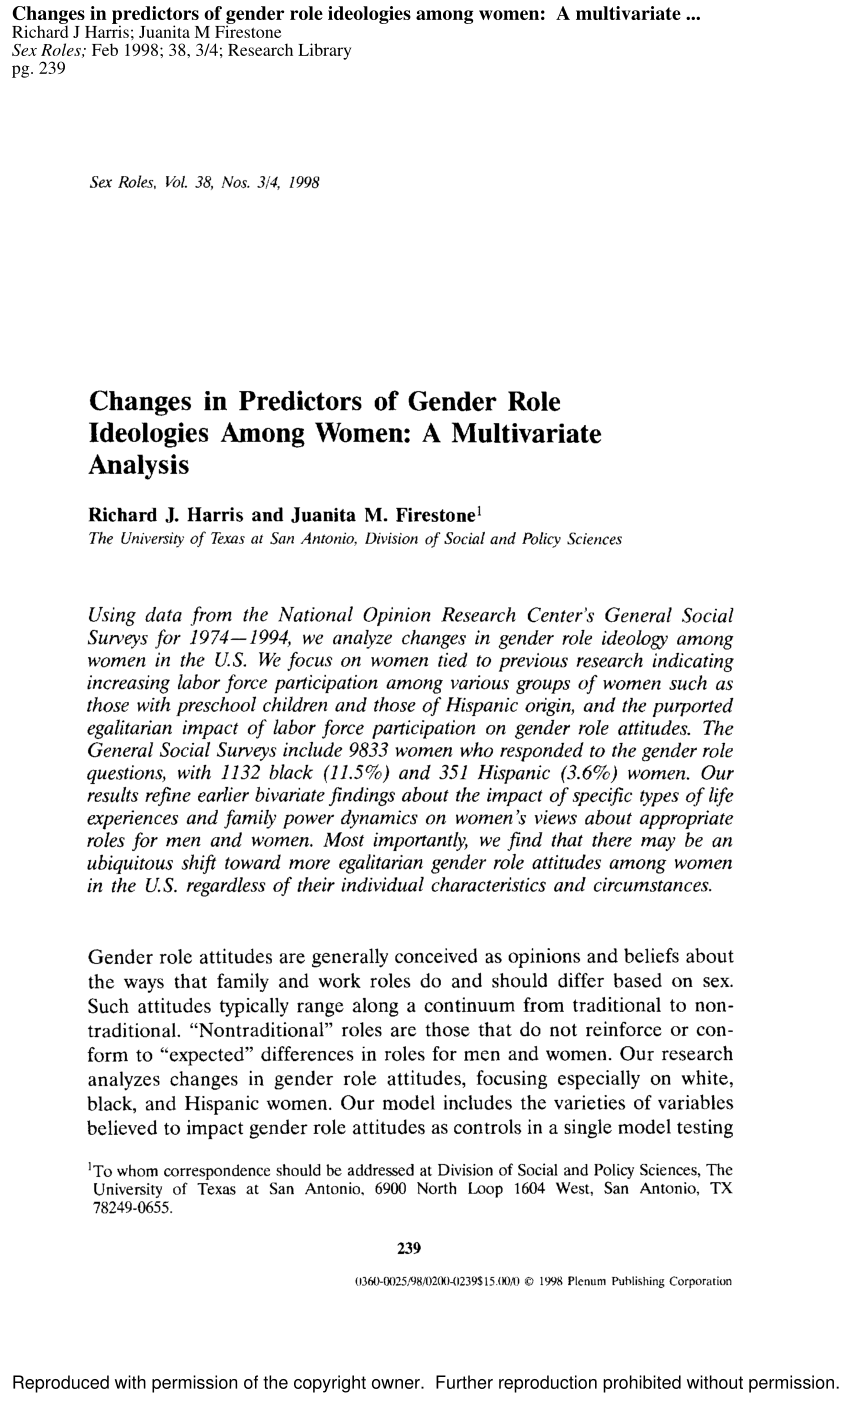 PDF) Changes in Predictors of Gender Role Ideologies Among Women A Multivariate Analysis